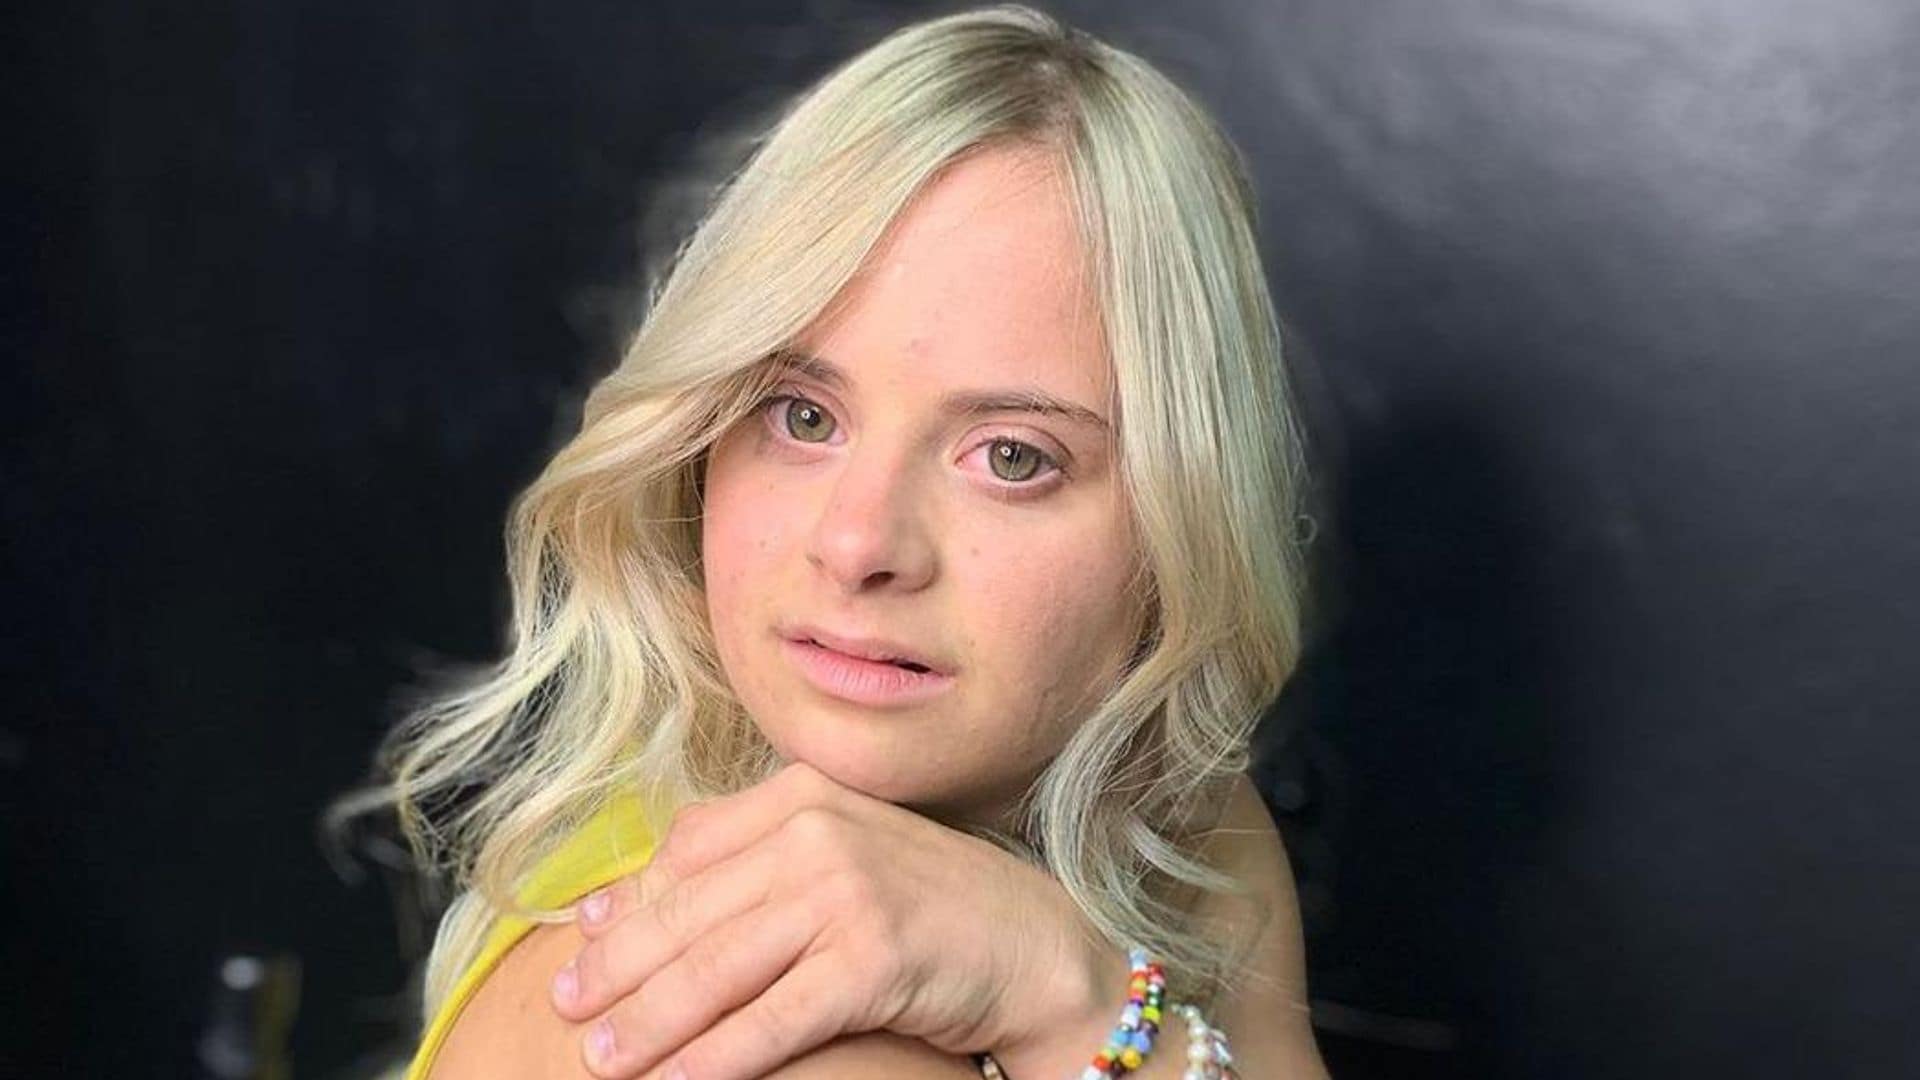 Puerto Rican model with Down Syndrome, Sofía Jirau is conquering the fashion world